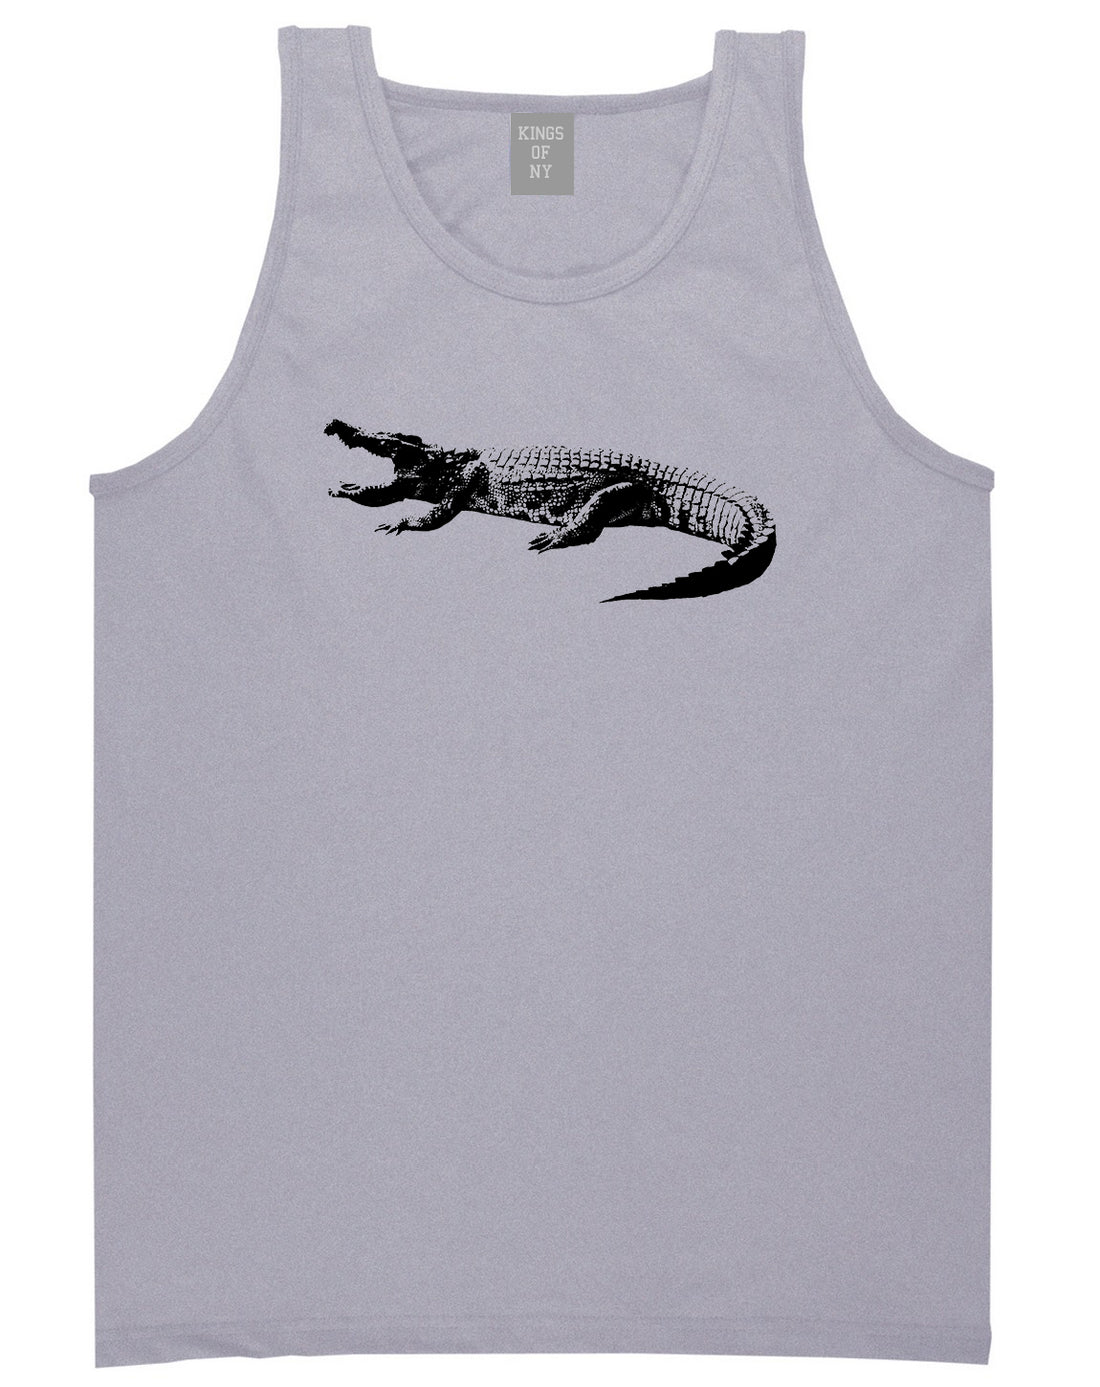 Alligator Grey Tank Top Shirt by Kings Of NY